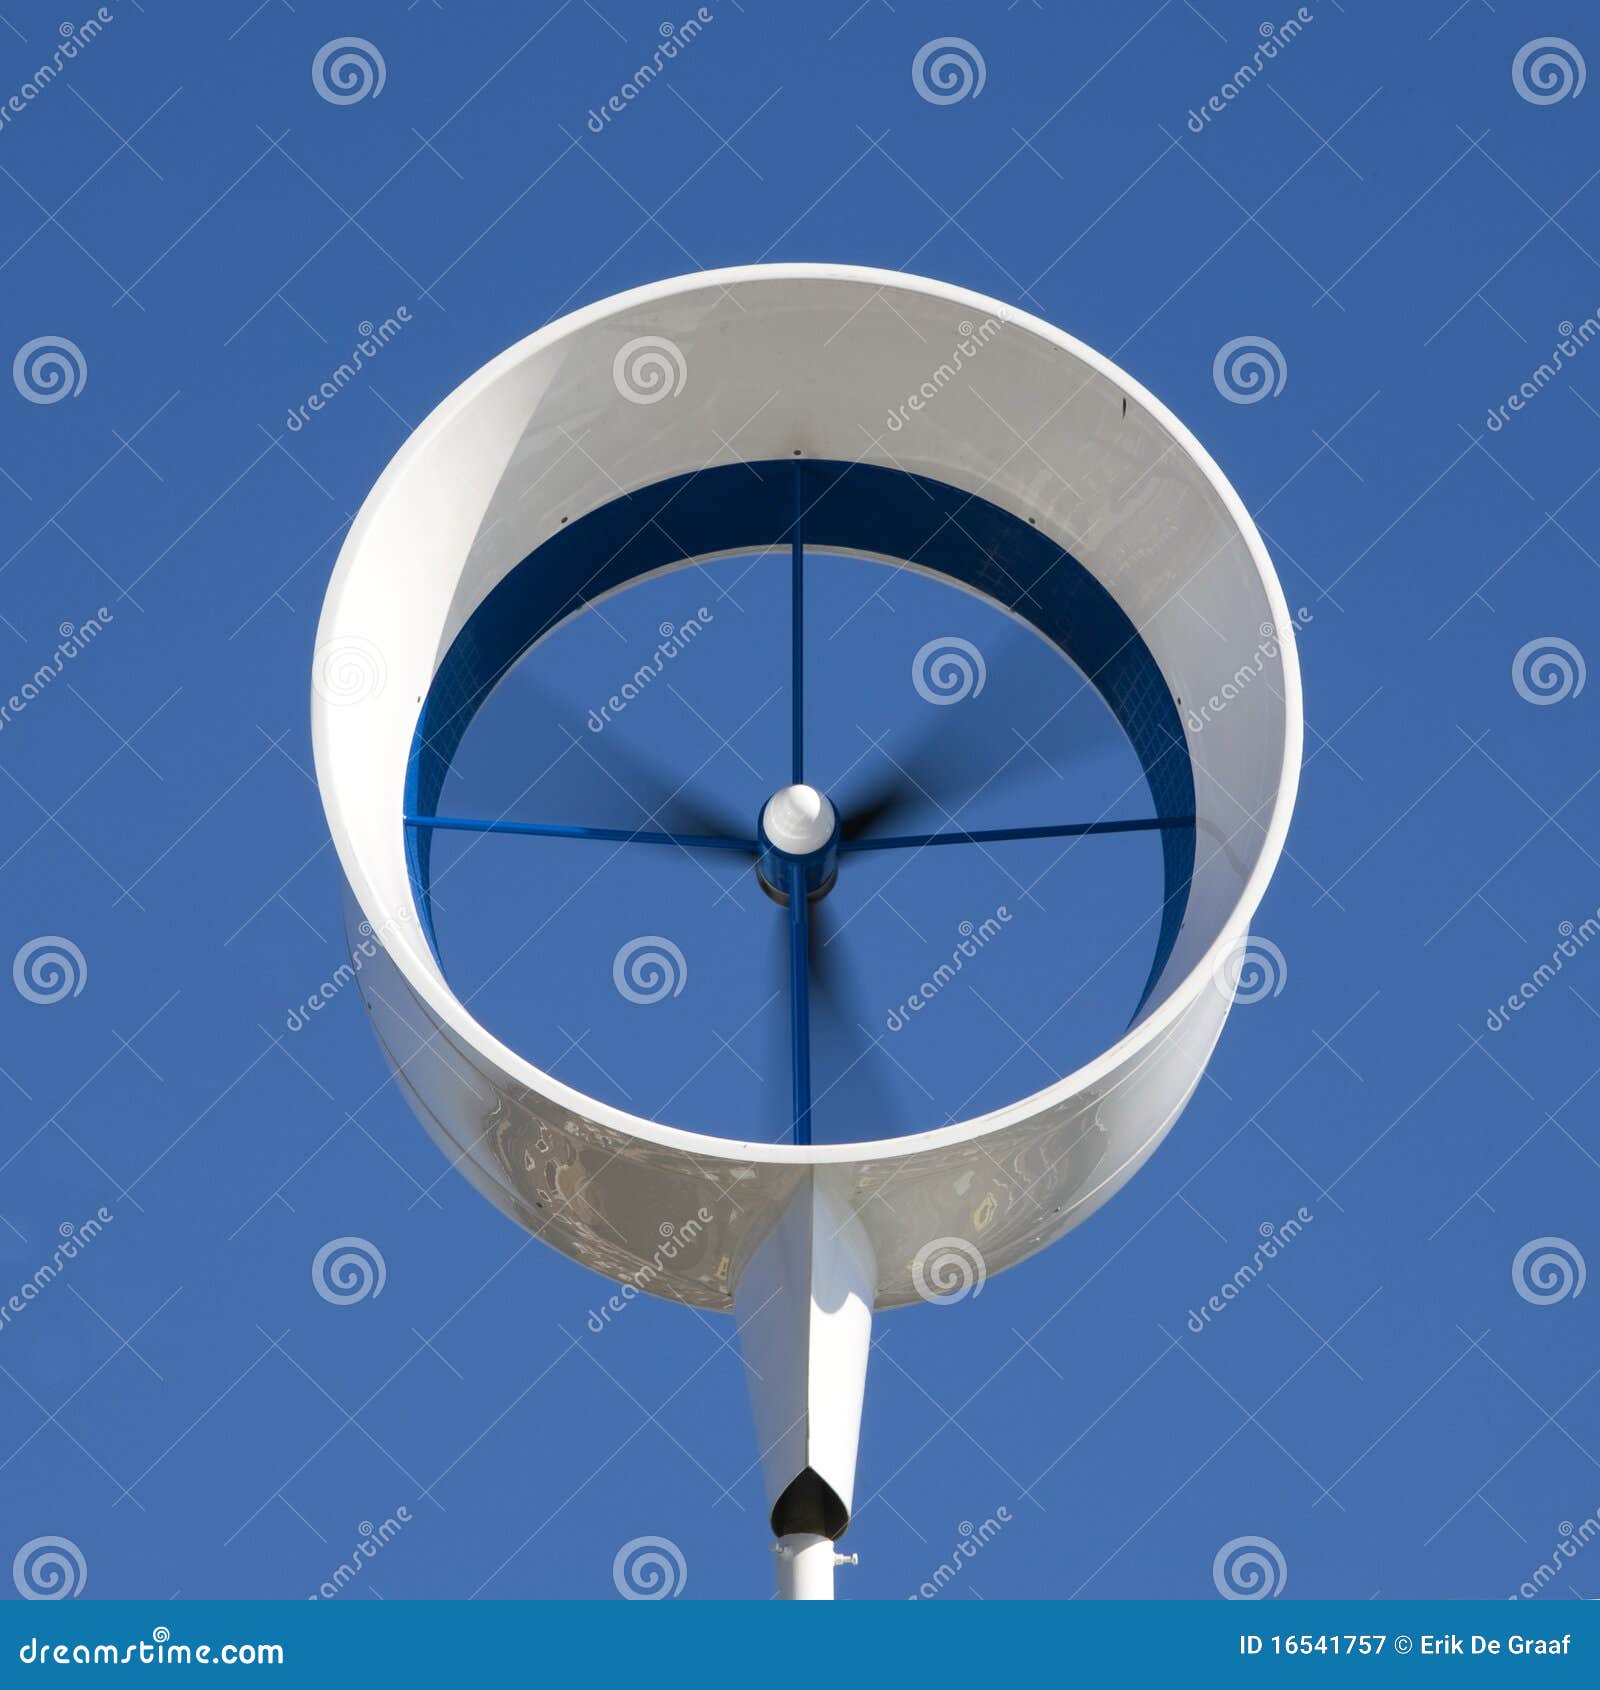 Residential Wind Turbine Royalty Free Stock Photography - Image 